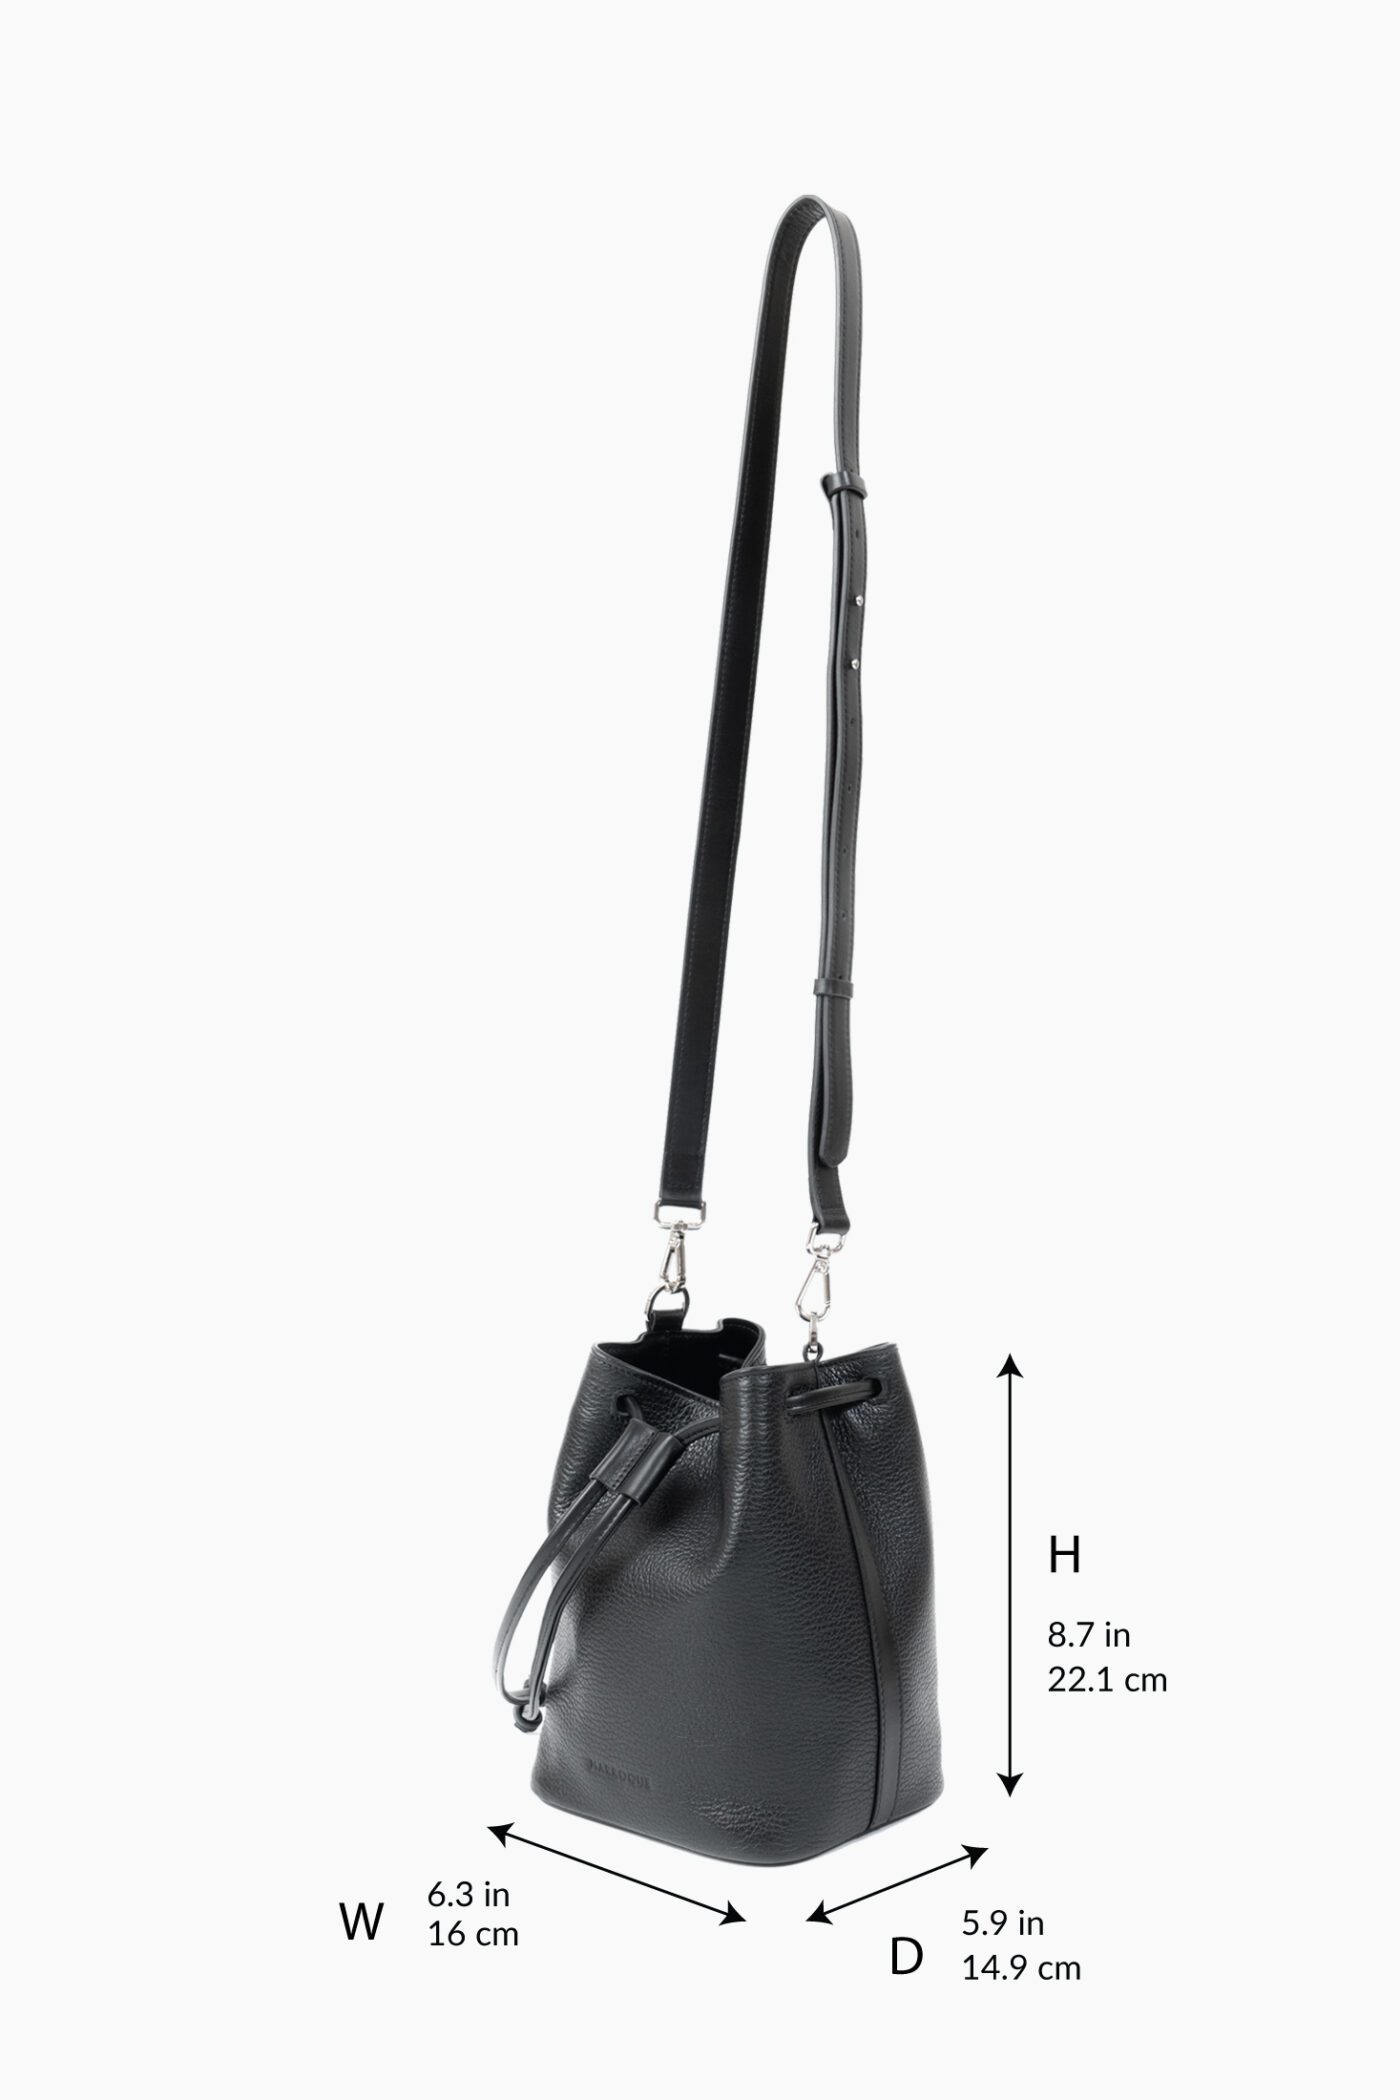 Piper Charcoal Leather bucket bag - Marroque TH Official Site ...